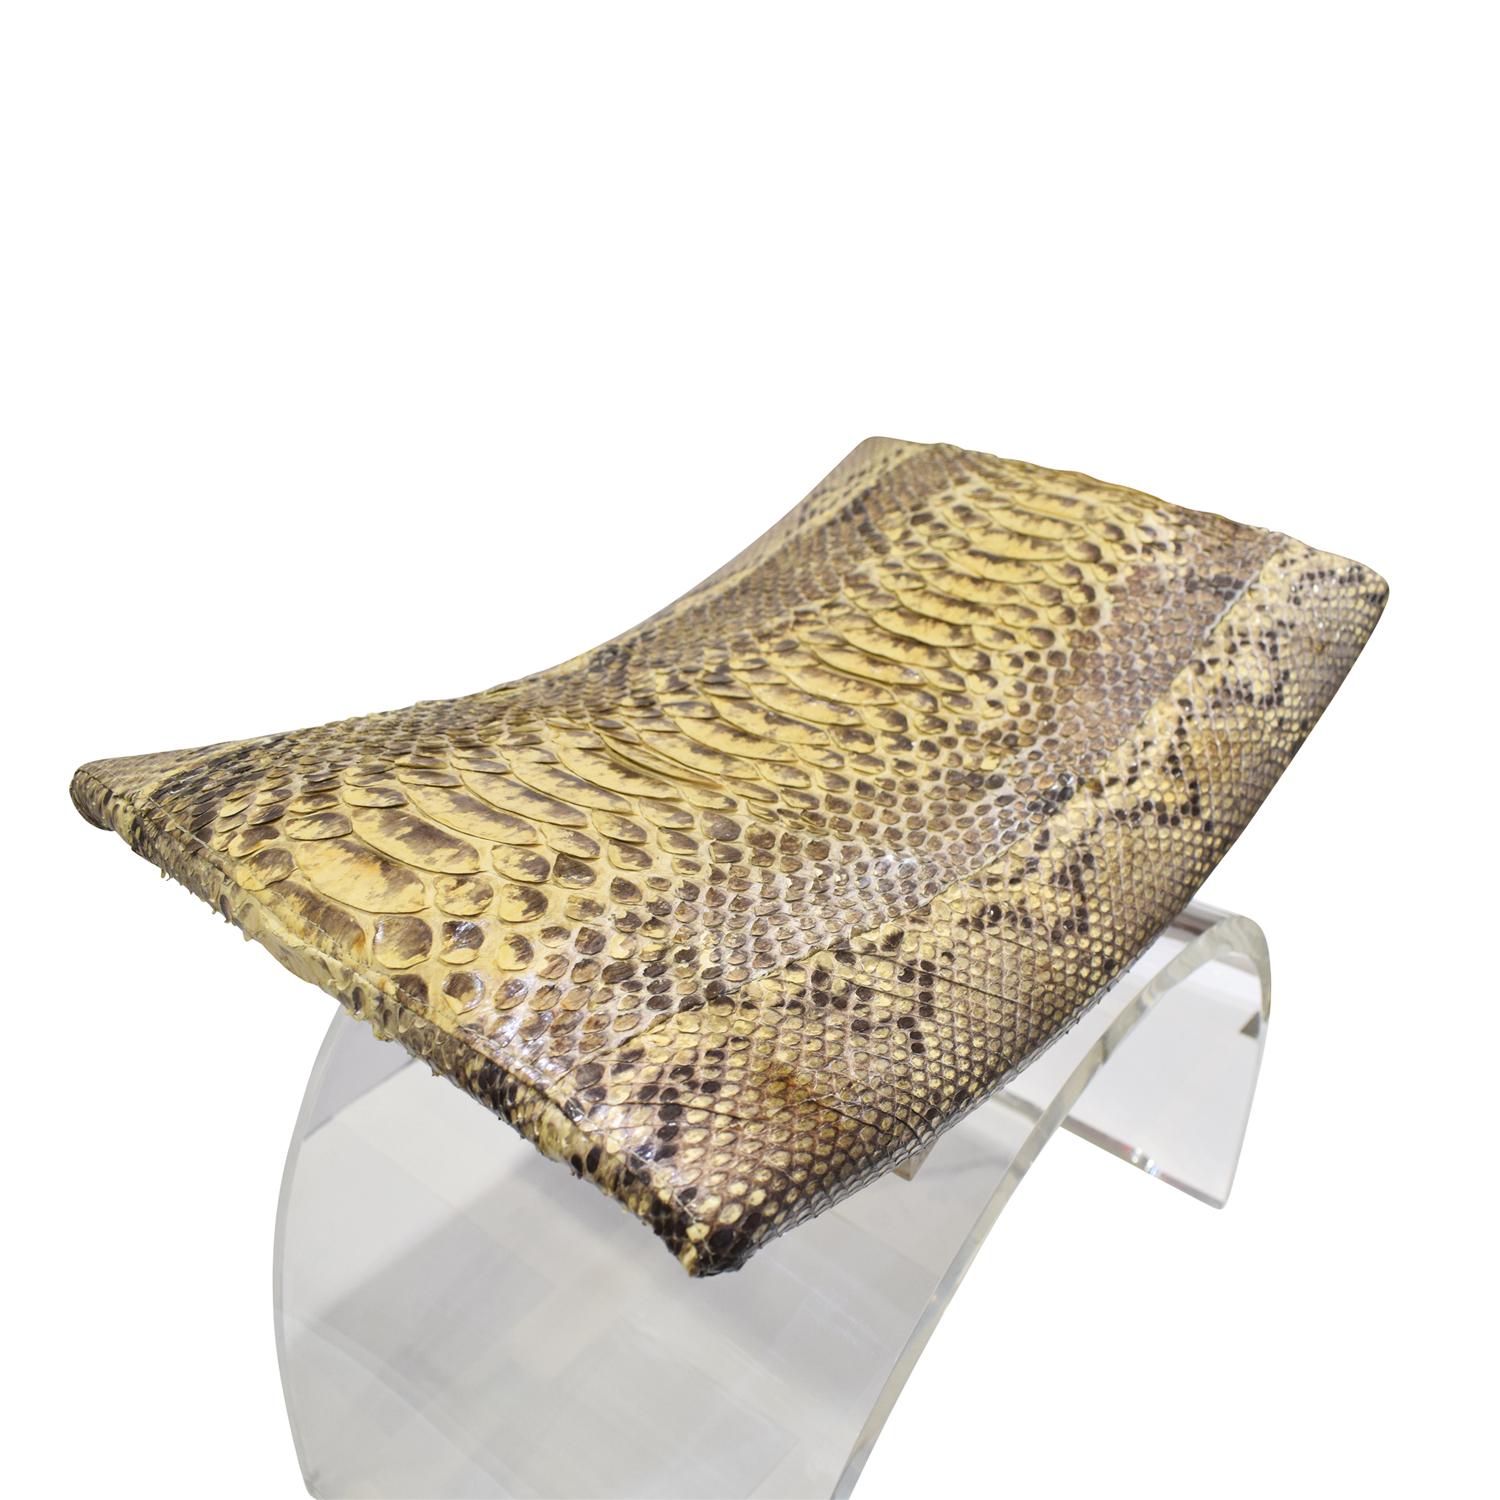 Hand-Crafted Chic Bench in Lucite with Python Seat, 1970s